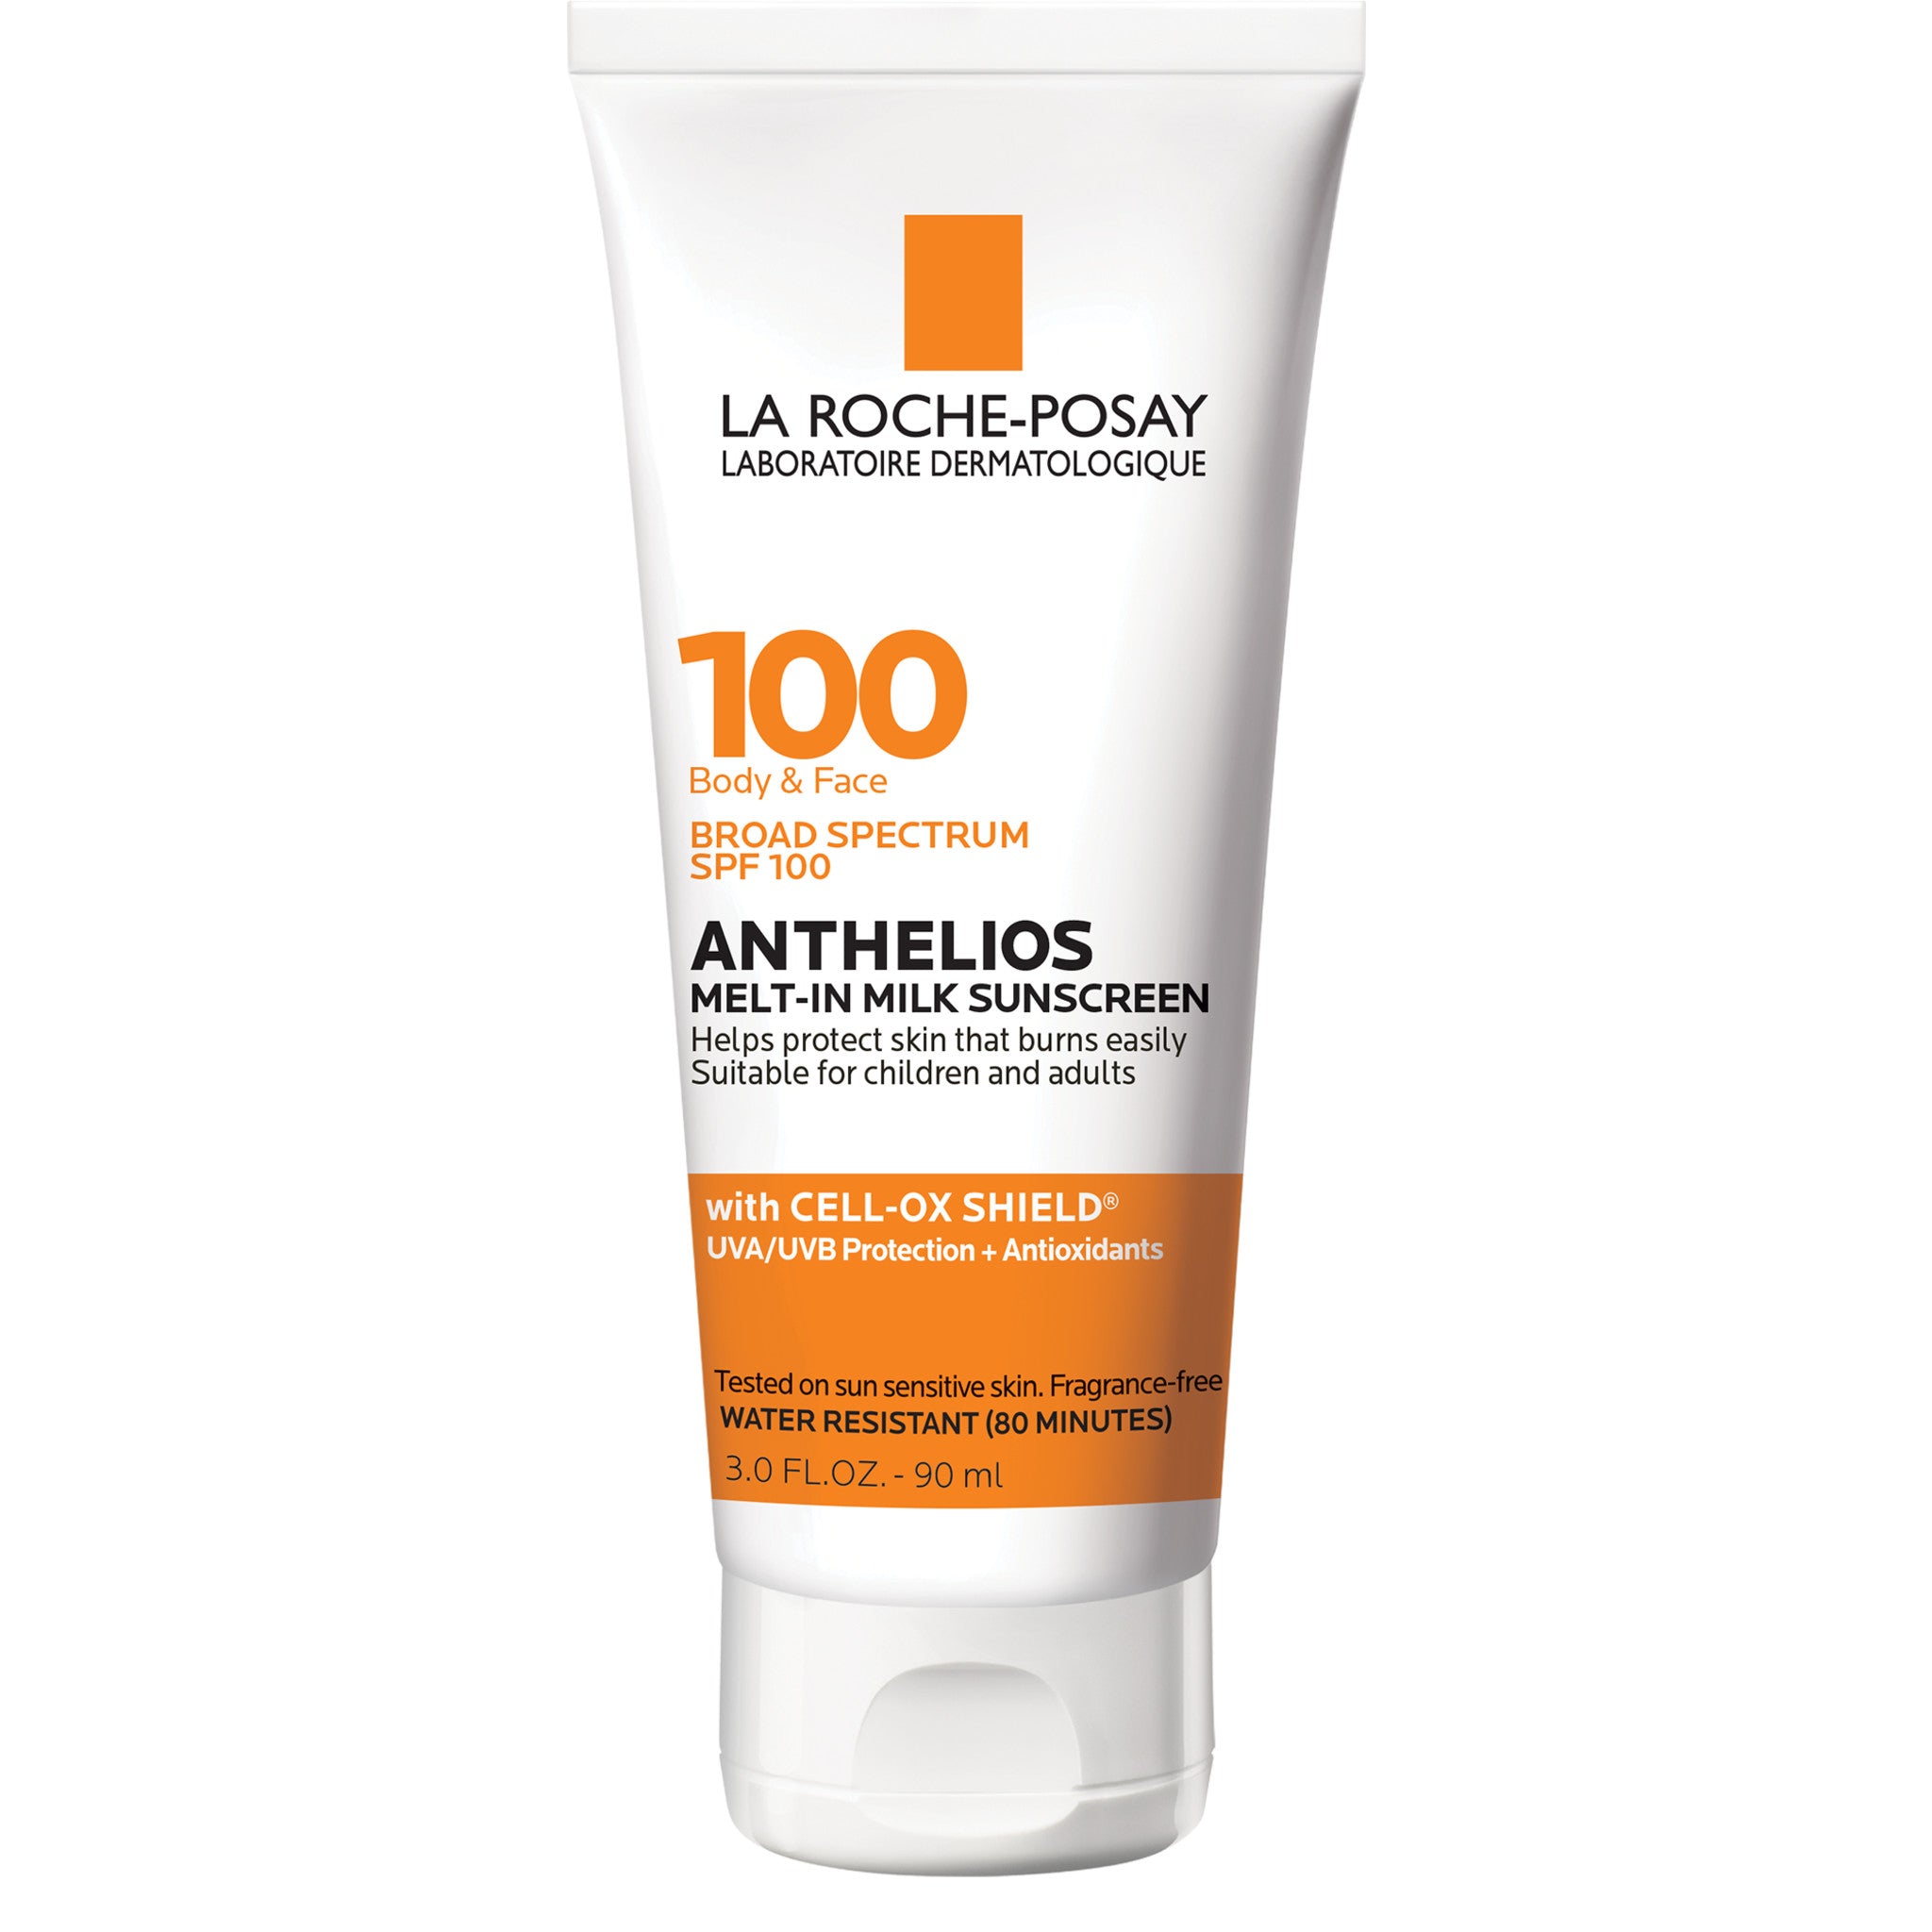 La Roche-Posay Anthelios Melt-in Milk Body and Face Sunscreen Lotion Broad Spectrum SPF 100 main image.